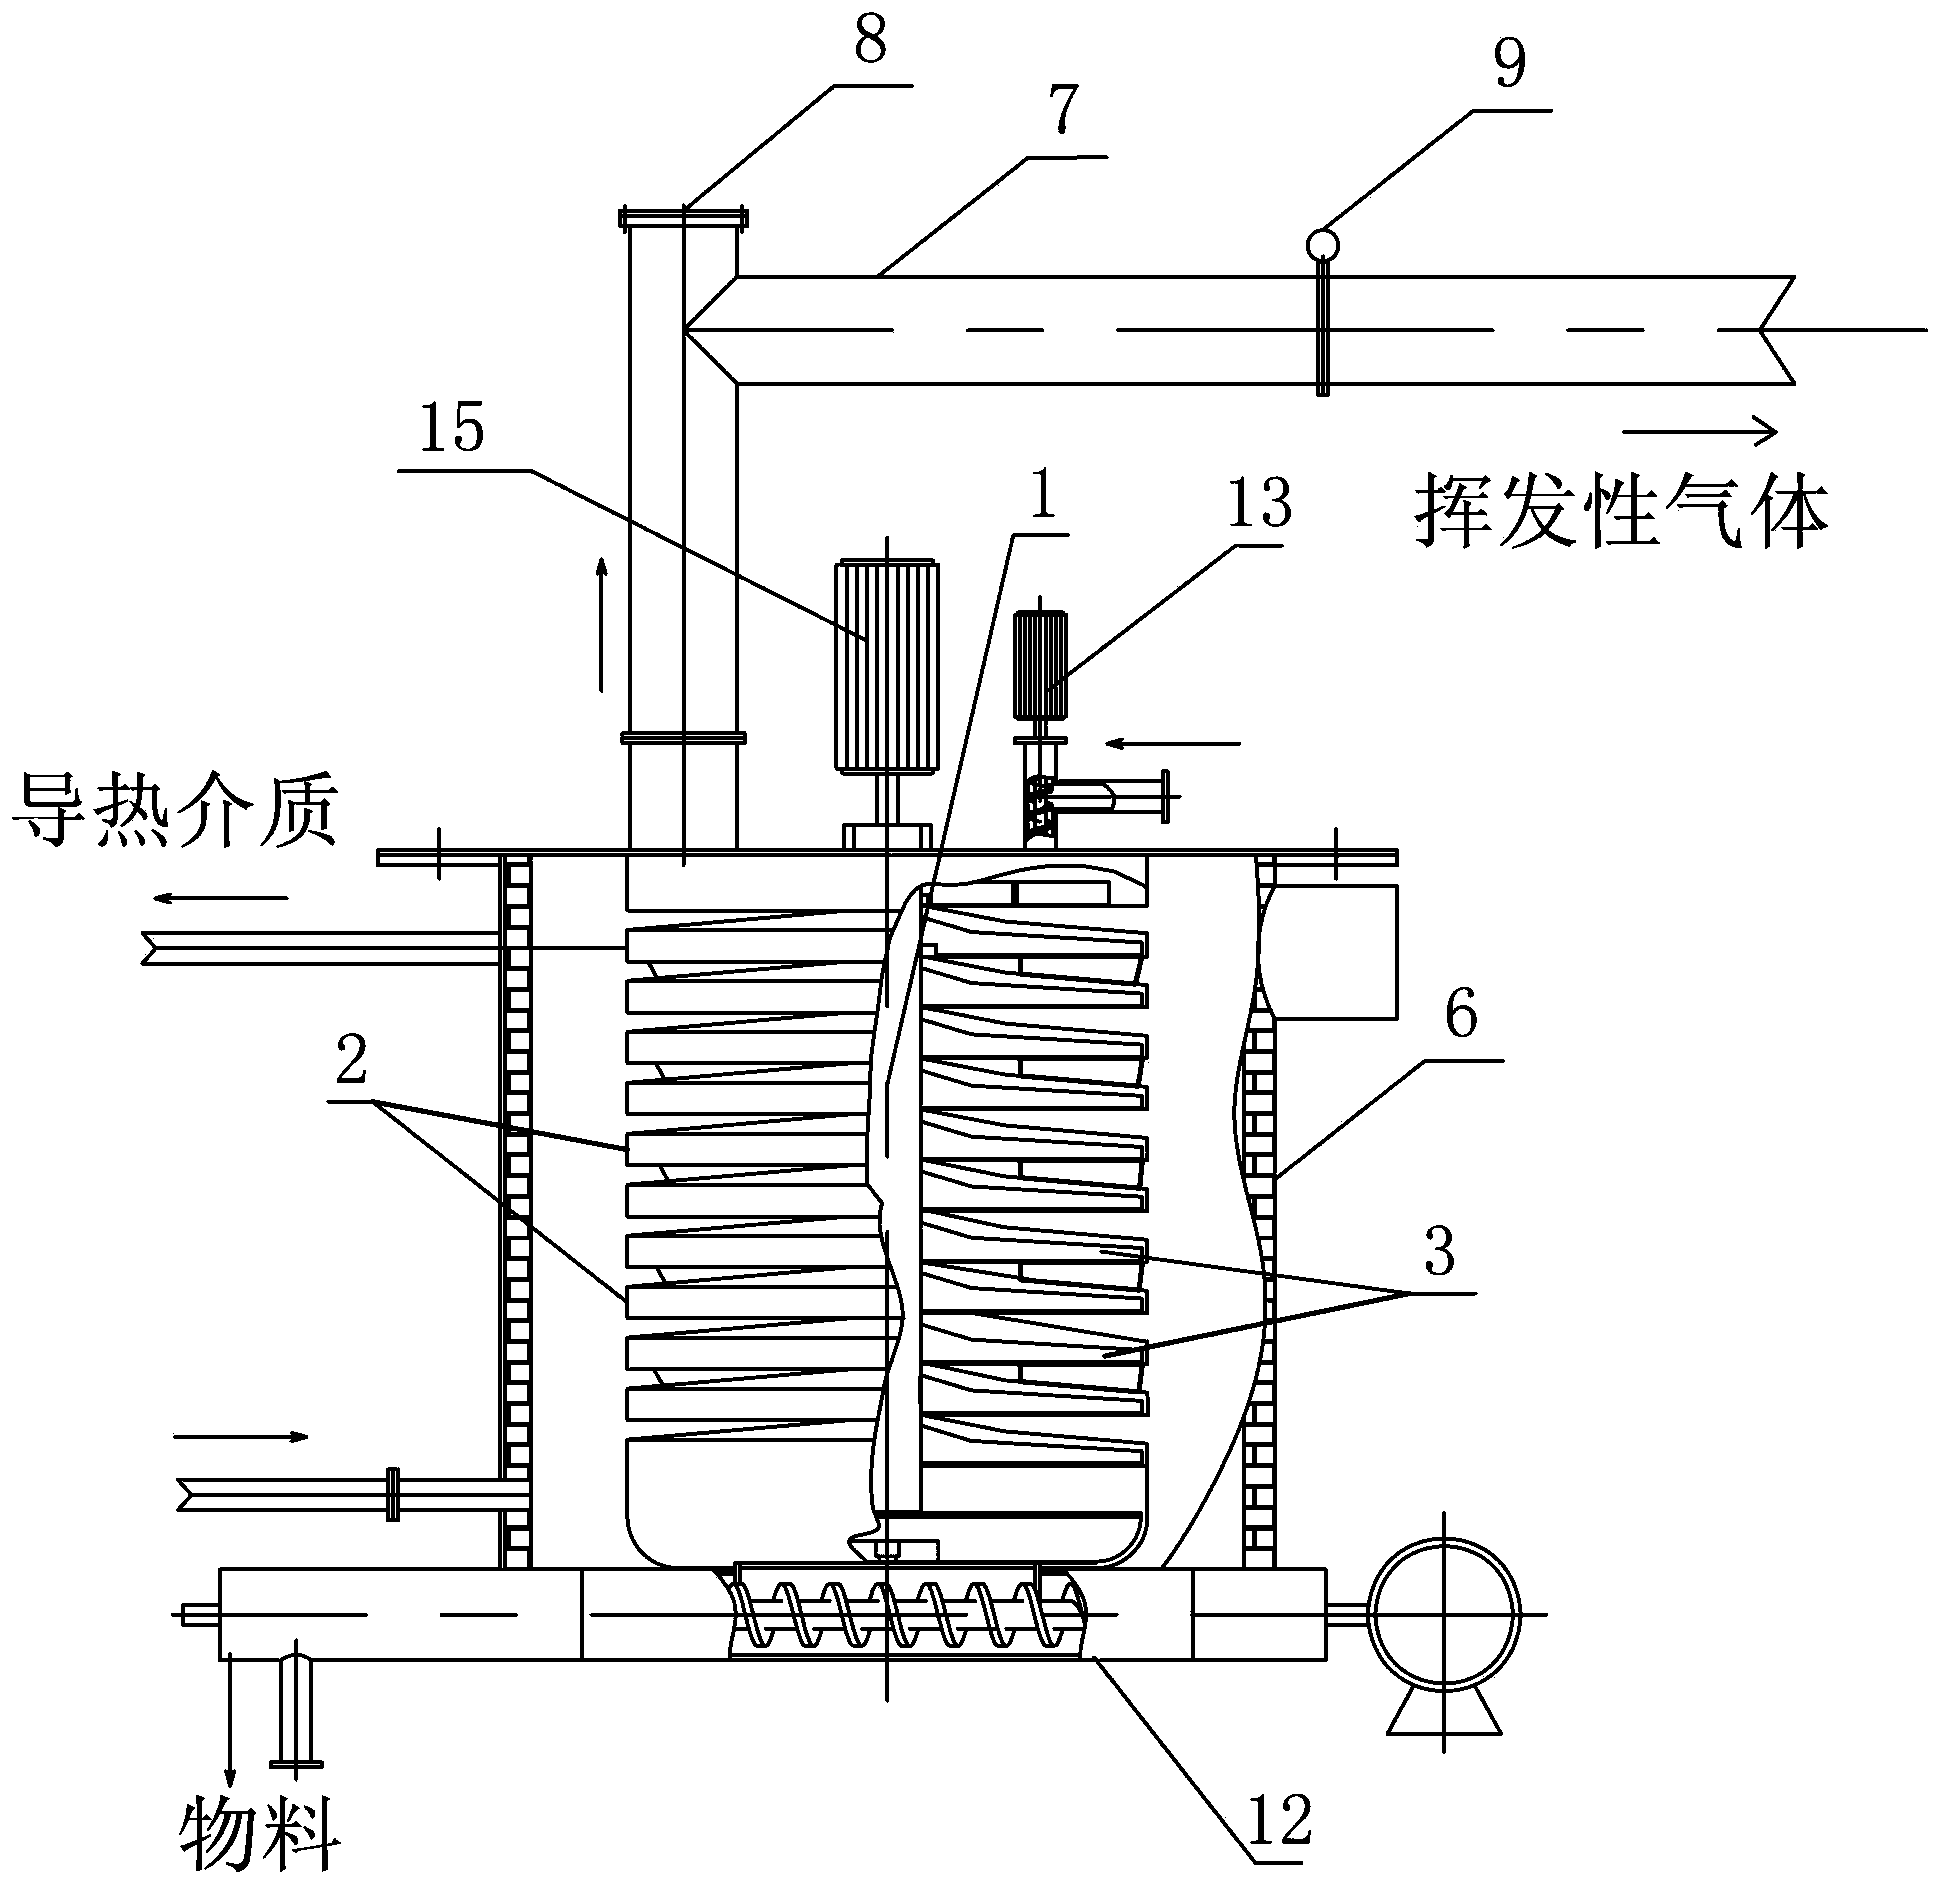 Slurry or powder continuous drying system